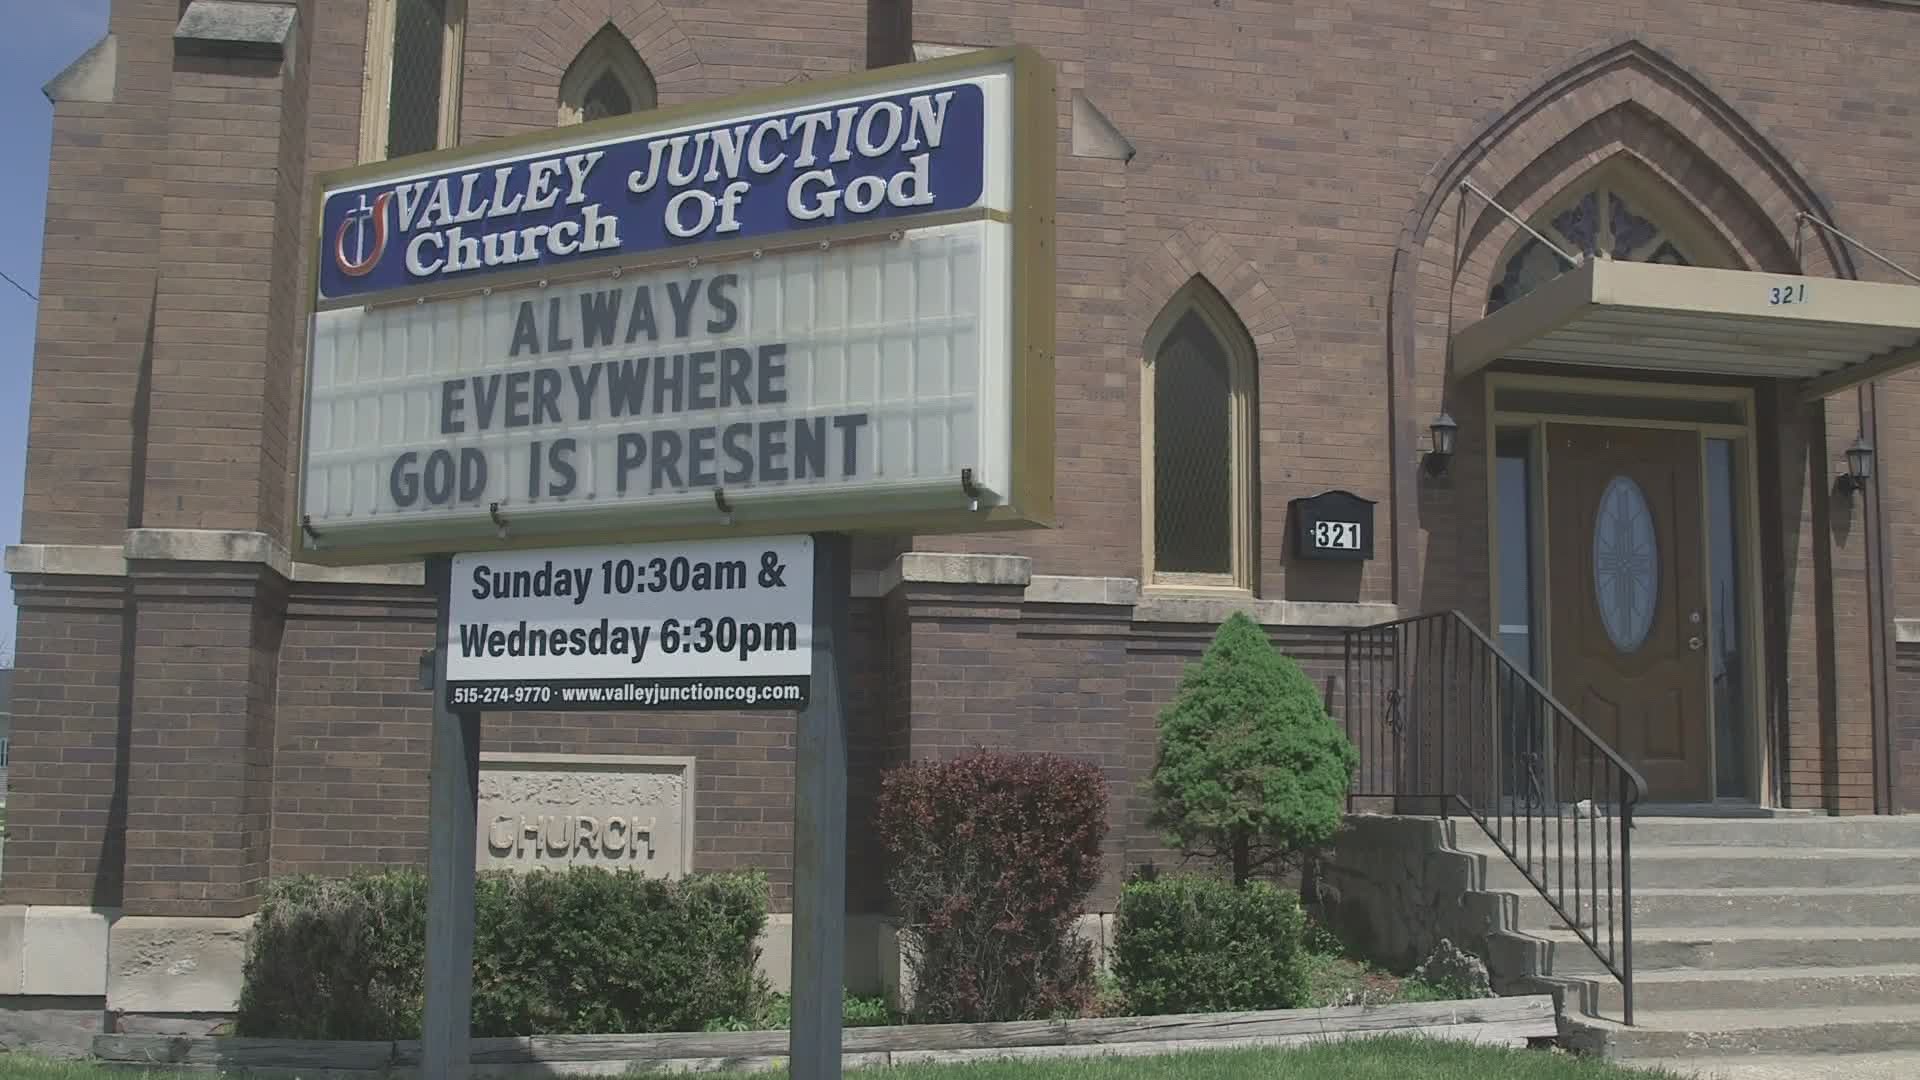 Despite most churches keeping their doors closed, one Valley Junction church took advantage of Gov. Reynold's okay to reopen and had an in-person service Sunday.